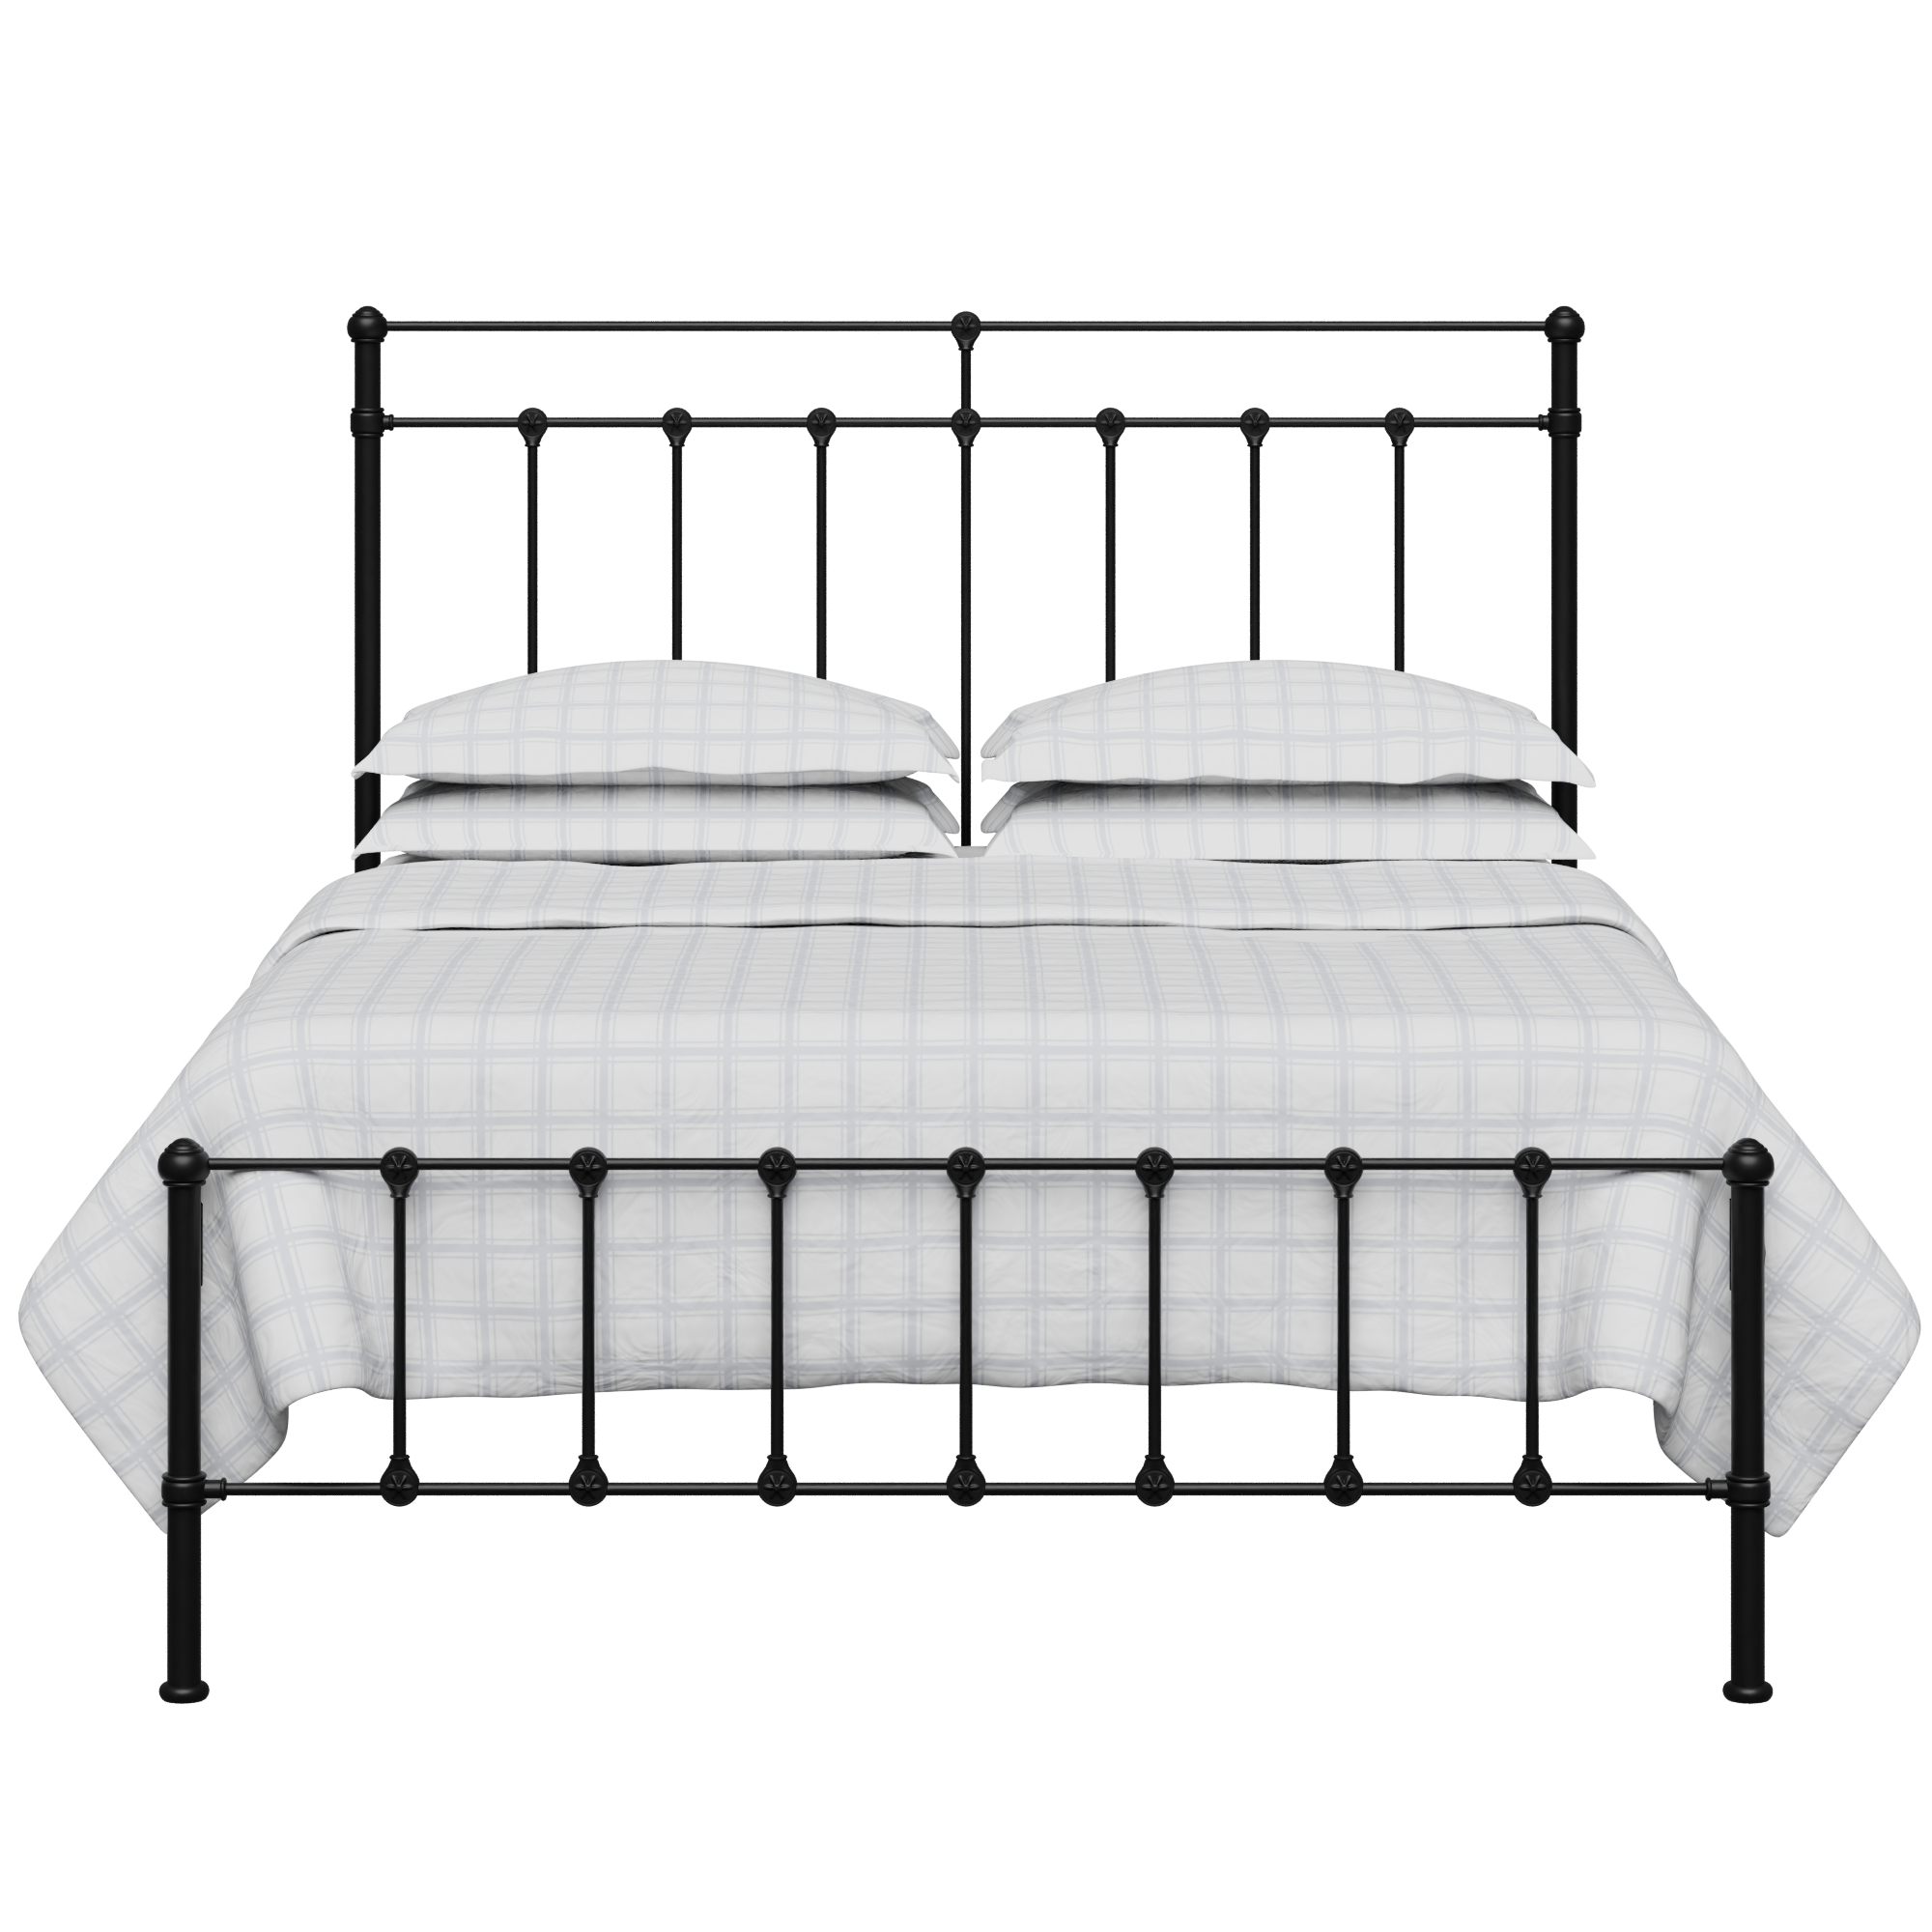 Ashley Iron Metal Bed Frame The, Are Metal Bed Frames Good